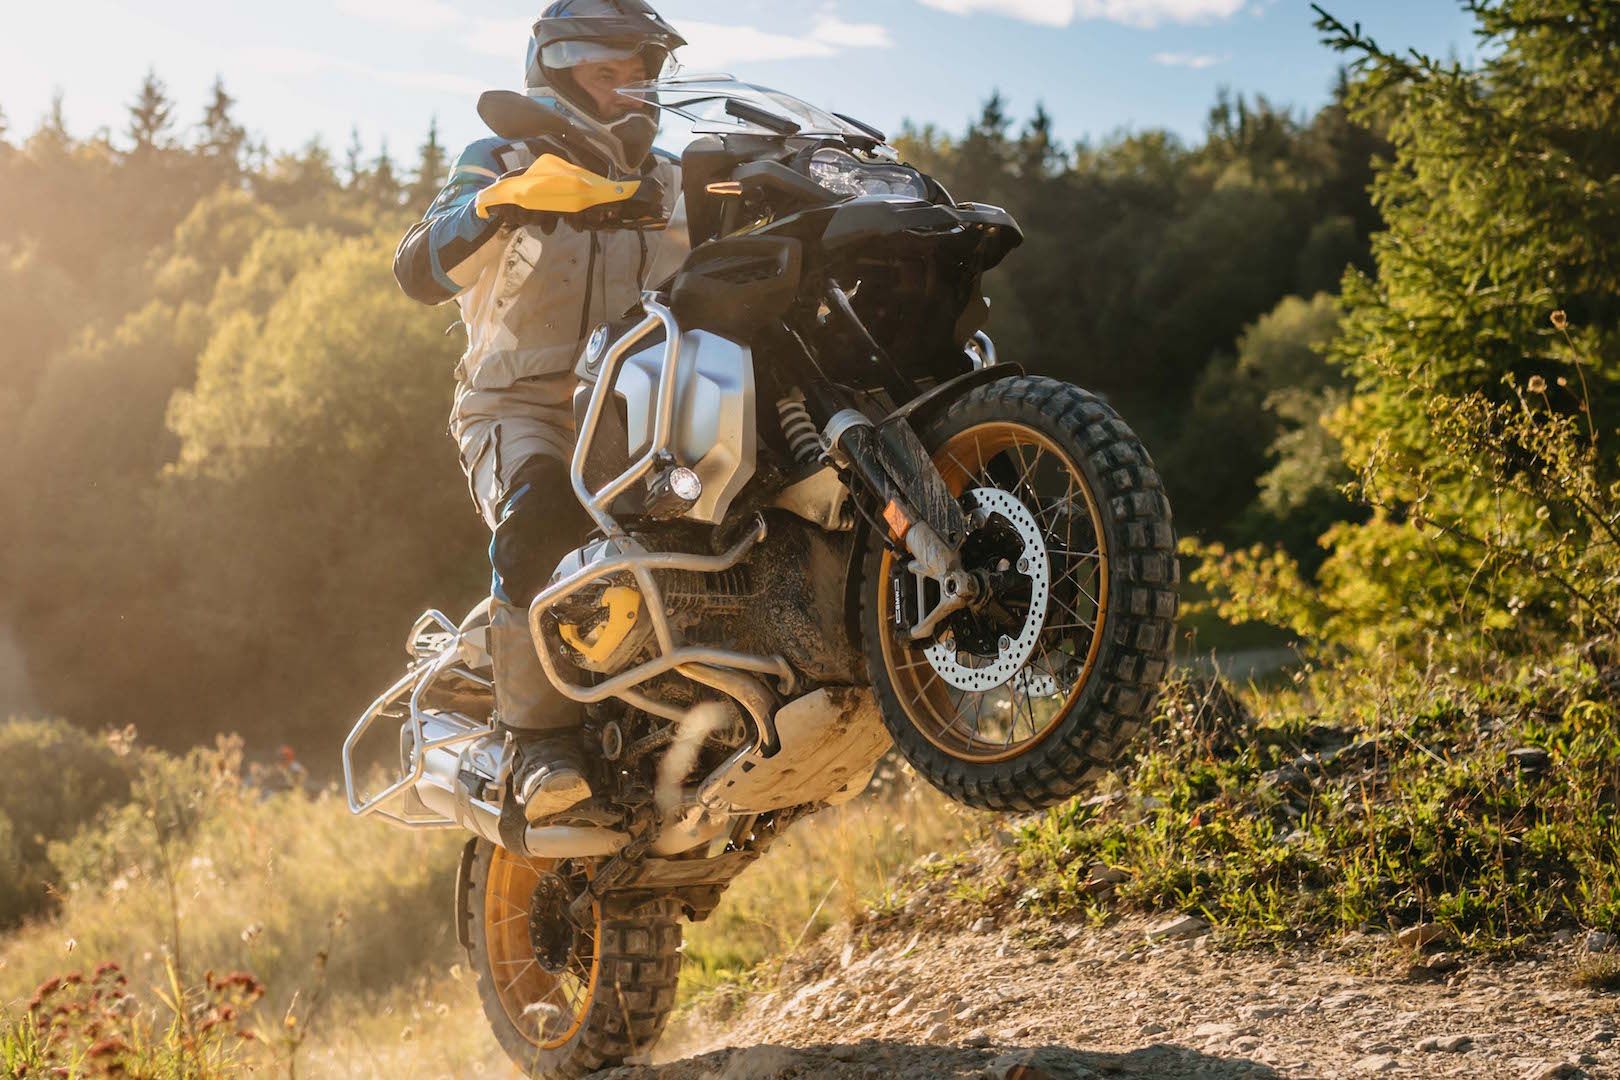 This Is The 2021 BMW R1250GS GSA: Adaptive Headlight, Heated Seat, New Color